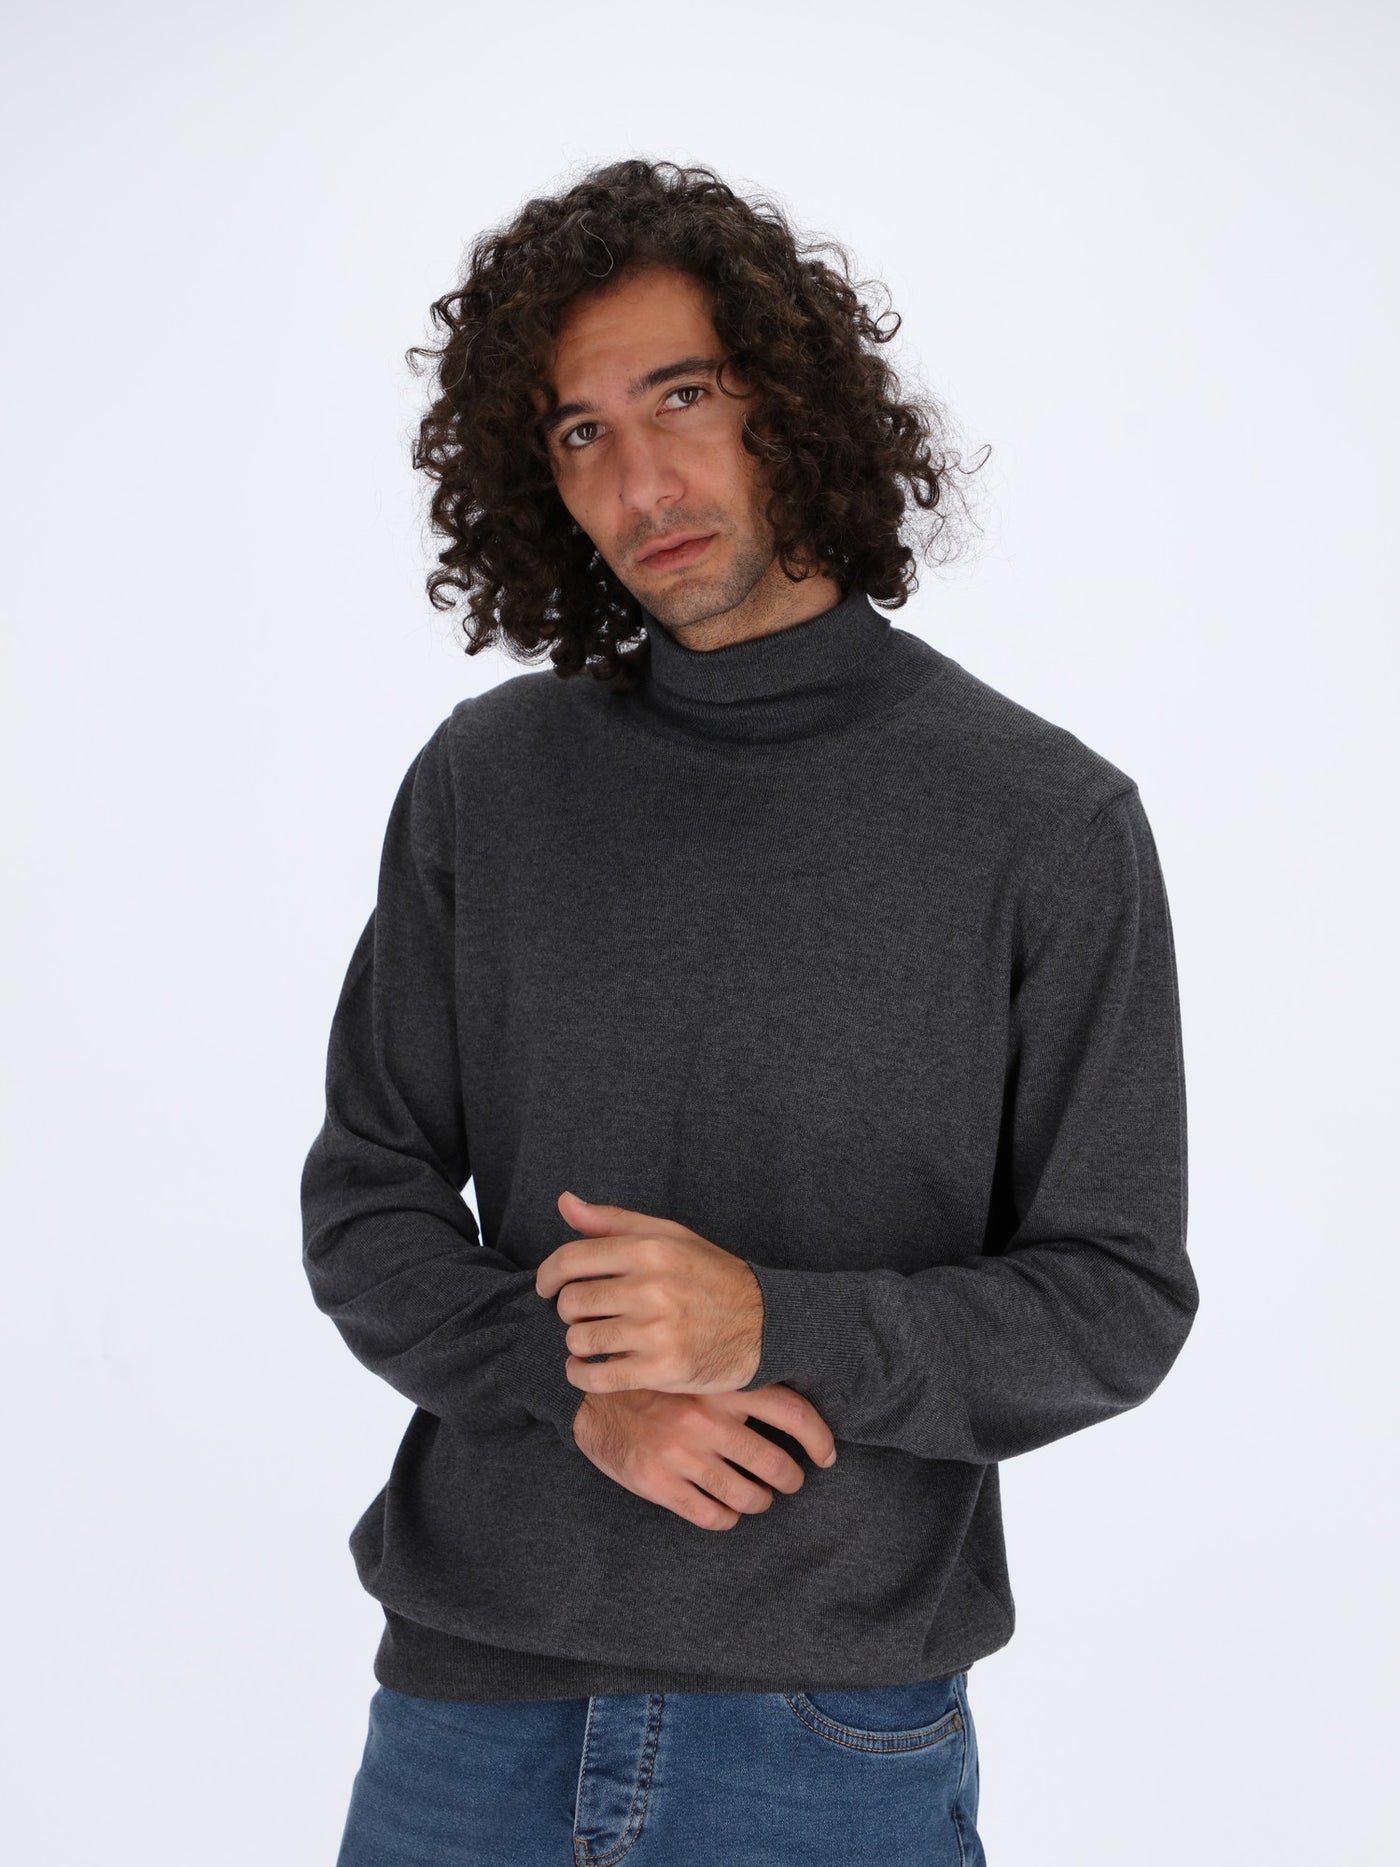 Knit Pullover with High Neck